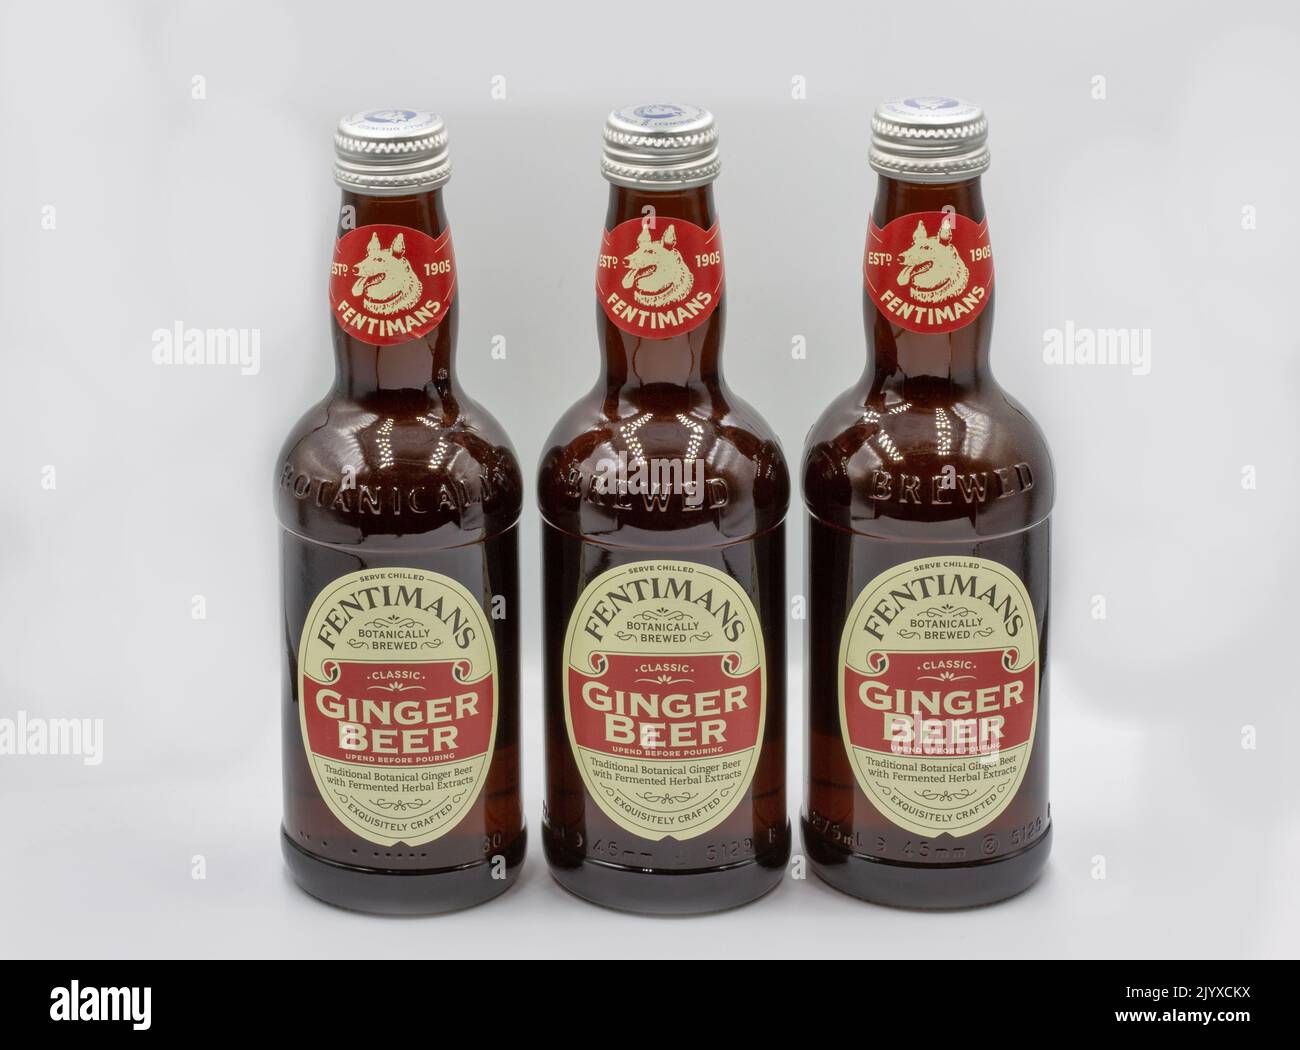 Kyiv, Ukraine - December 26, 2021: Fentimans traditional botanical ginger beer with fermented herbal extracts bottles closeup on white. It is a sweete Stock Photo